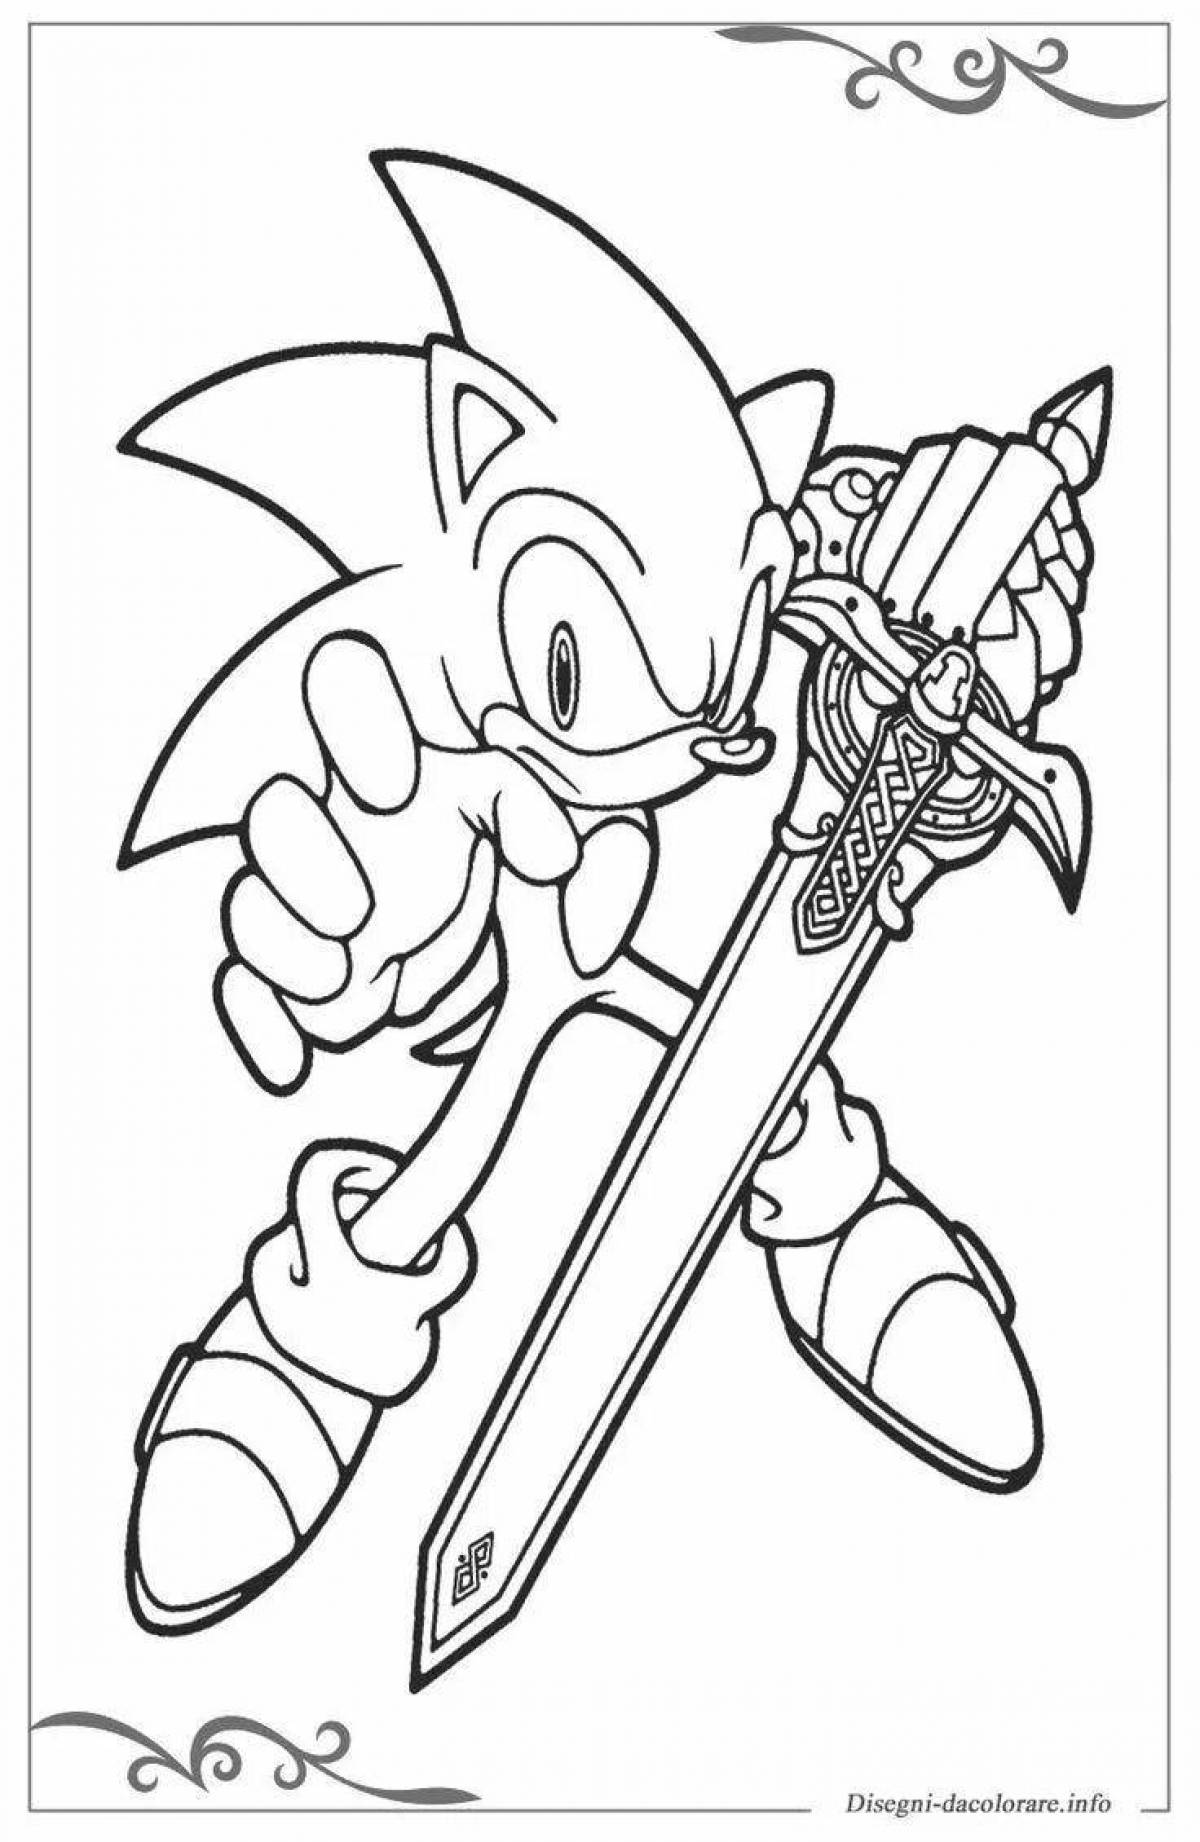 Comic sonic monster coloring book